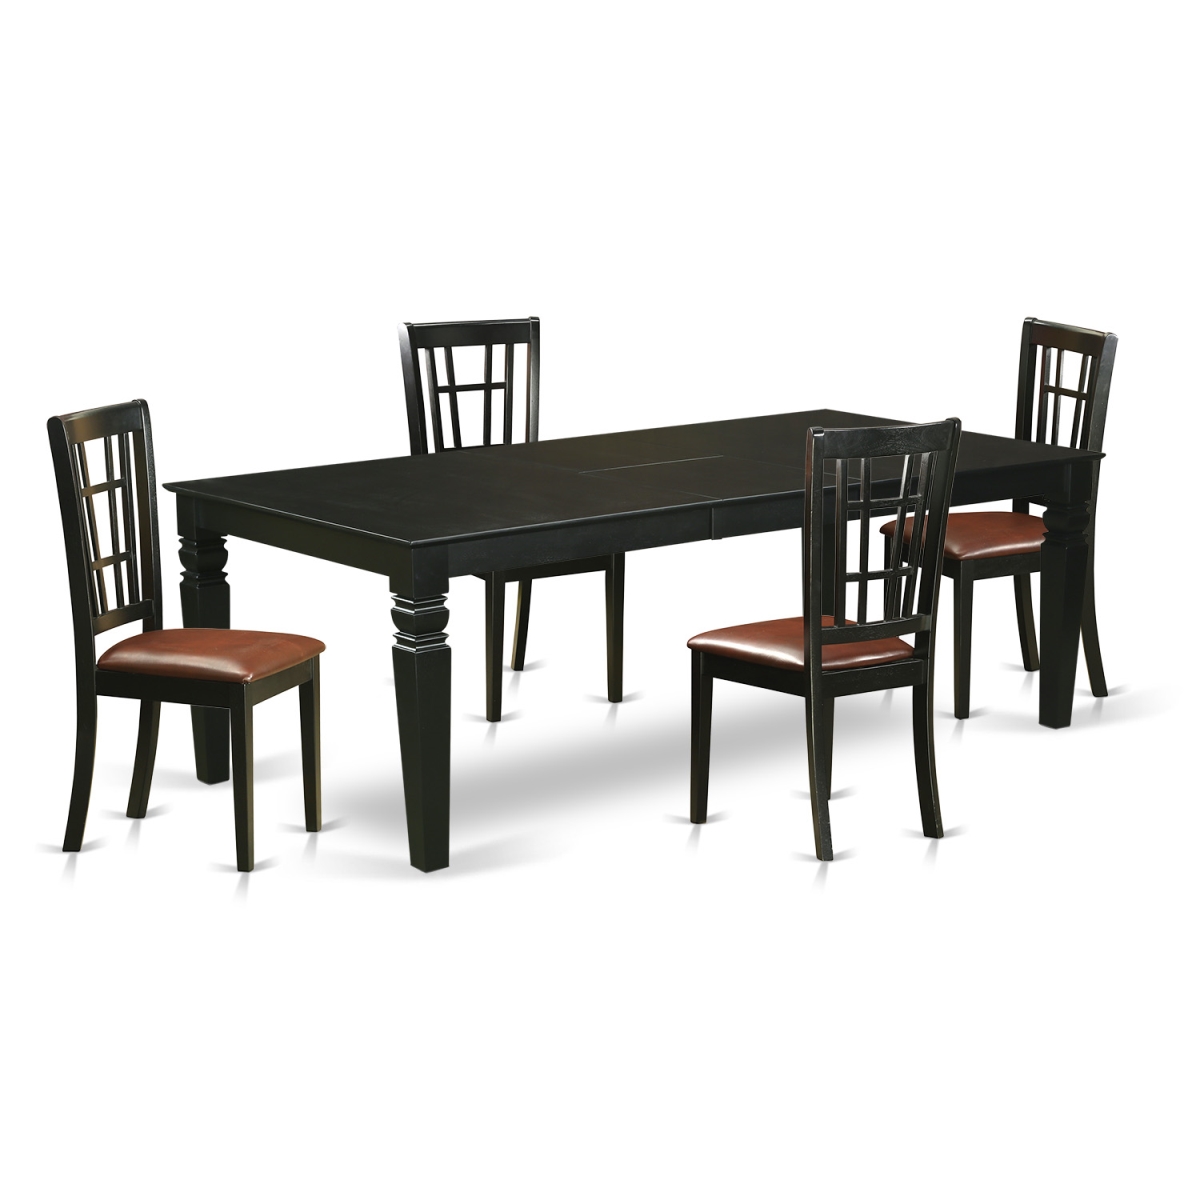 Lgni5-blk-lc Dinette Set With A Single Logan Table & 4 Faux Leather Upholstery Seat Chairs, Luxurious Black - 5 Piece